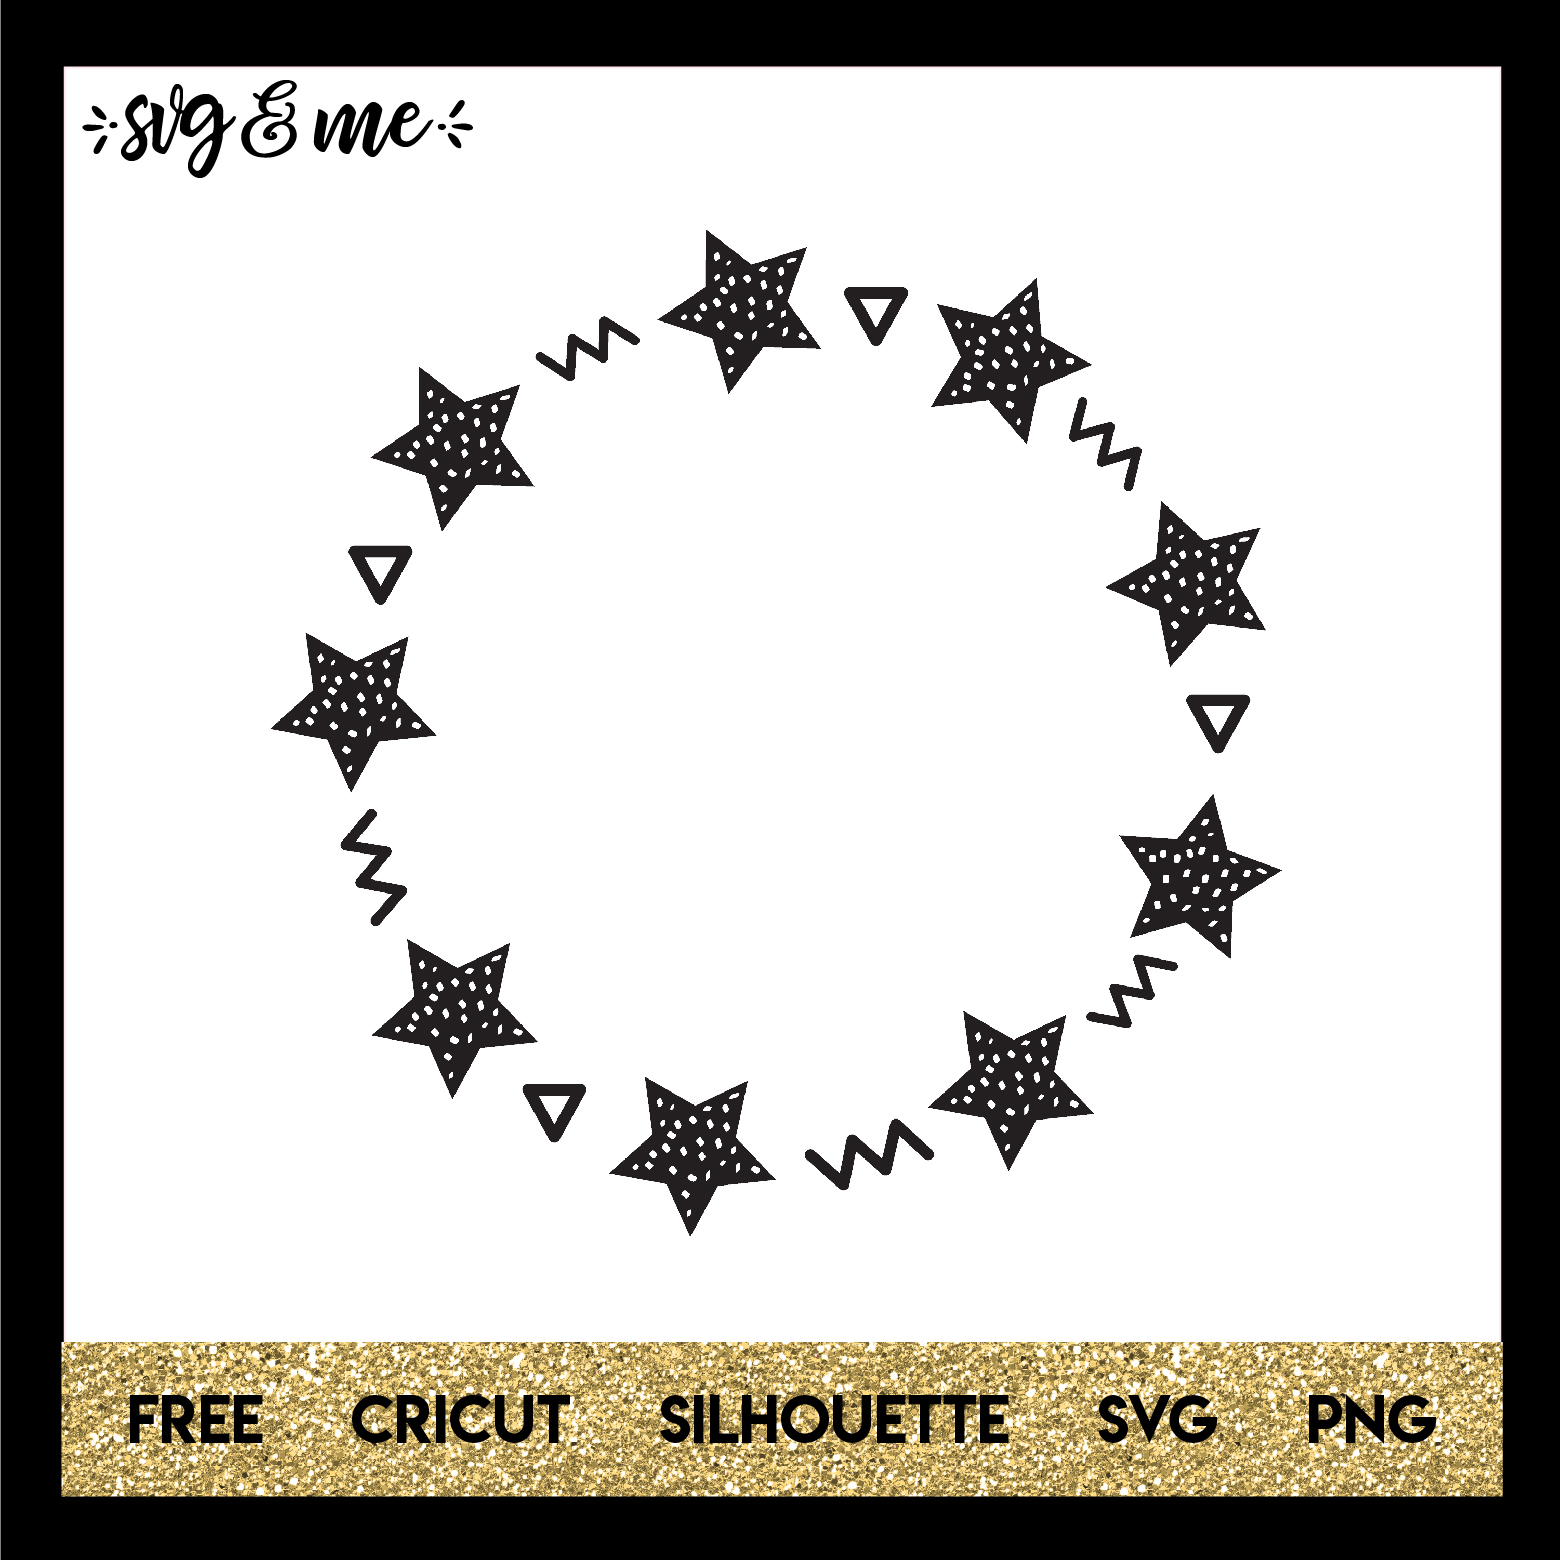 FREE SVG CUT FILE for Cricut, Silhouette and more - Star Geometric Wreath Frame SVG